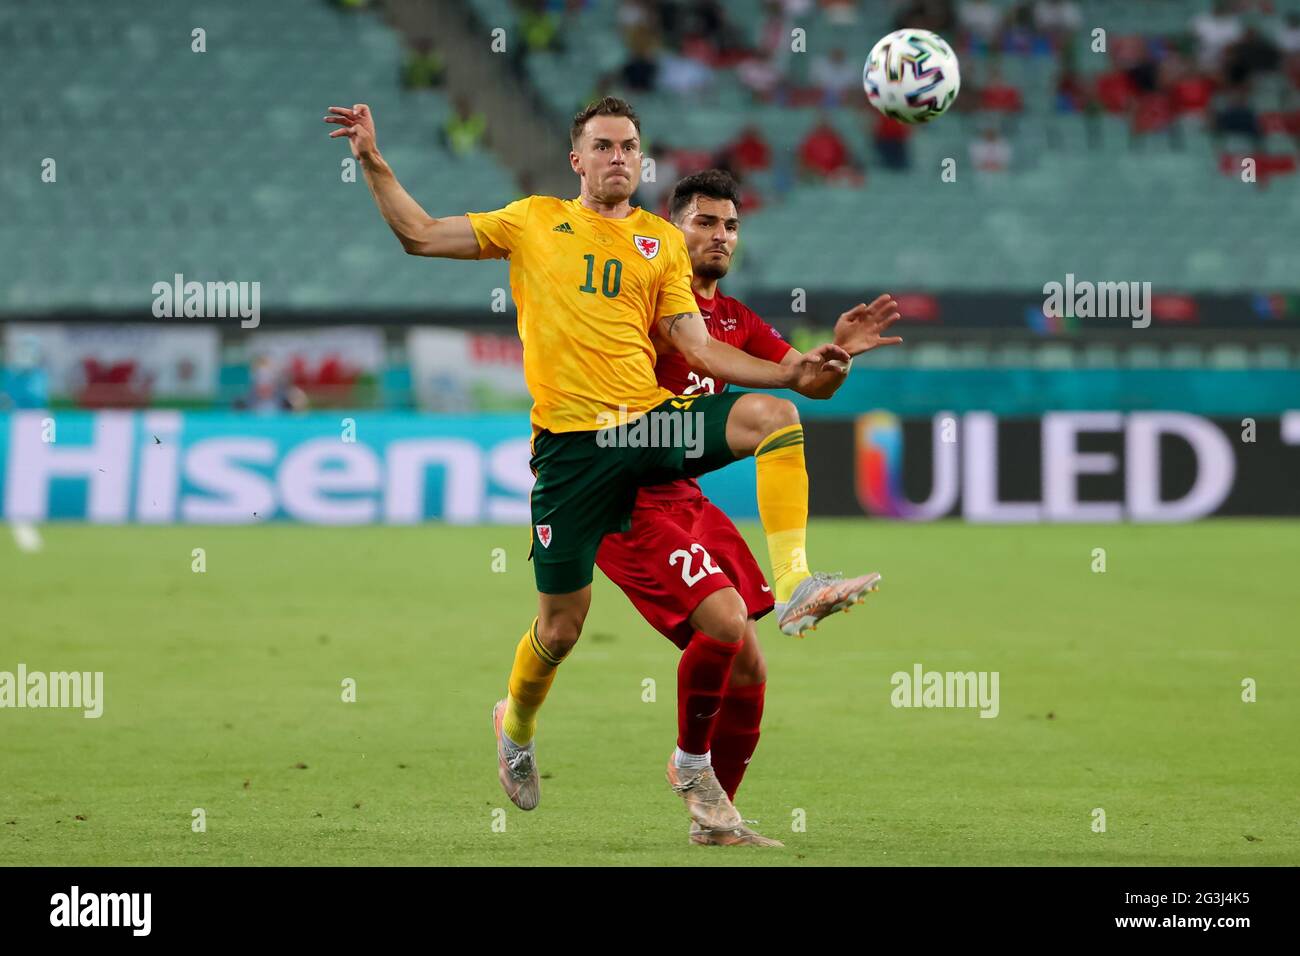 Aaron Ramsey of Wales and Kaan Ayhan of Turkey during the UEFA Euro 2020 Group A match at the Baku Olympic Stadium in Azerbaijan. Picture date: Wednesday June 16, 2021. Stock Photo